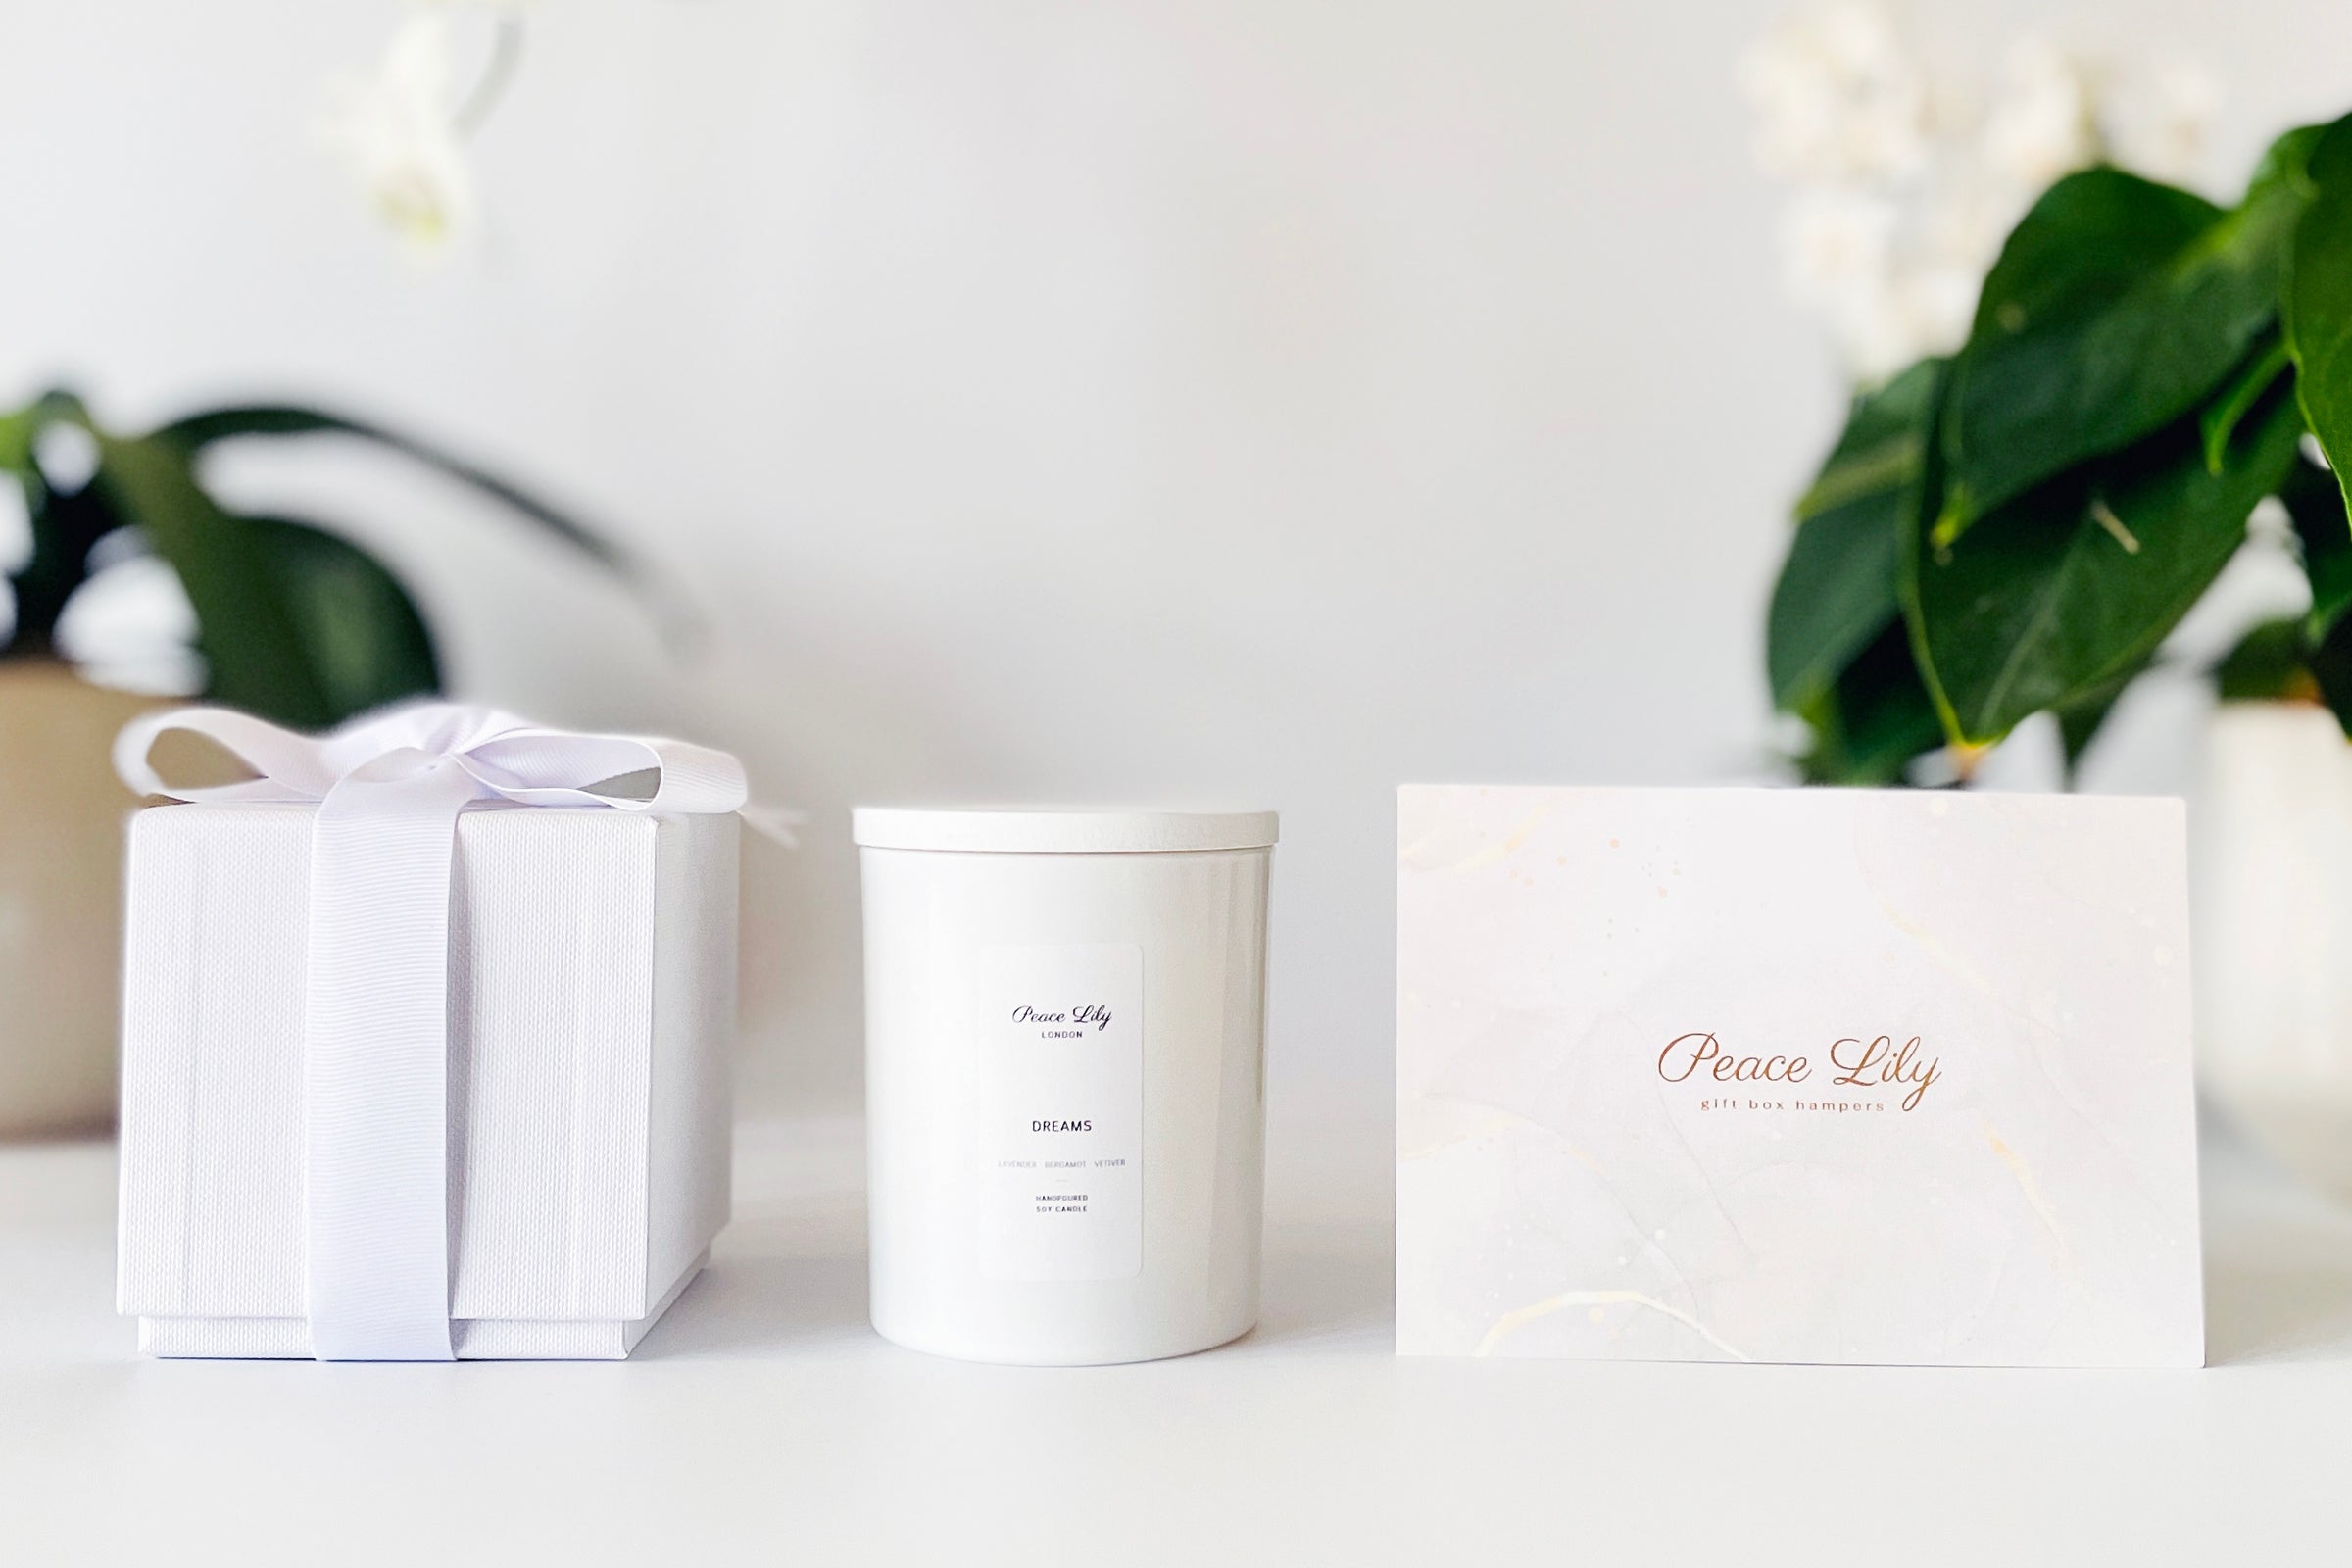 Luxury scented candle gift set with glass candle holder, luxury white box and ribbon and postcard for personalised message. Peace Lily plant in background.